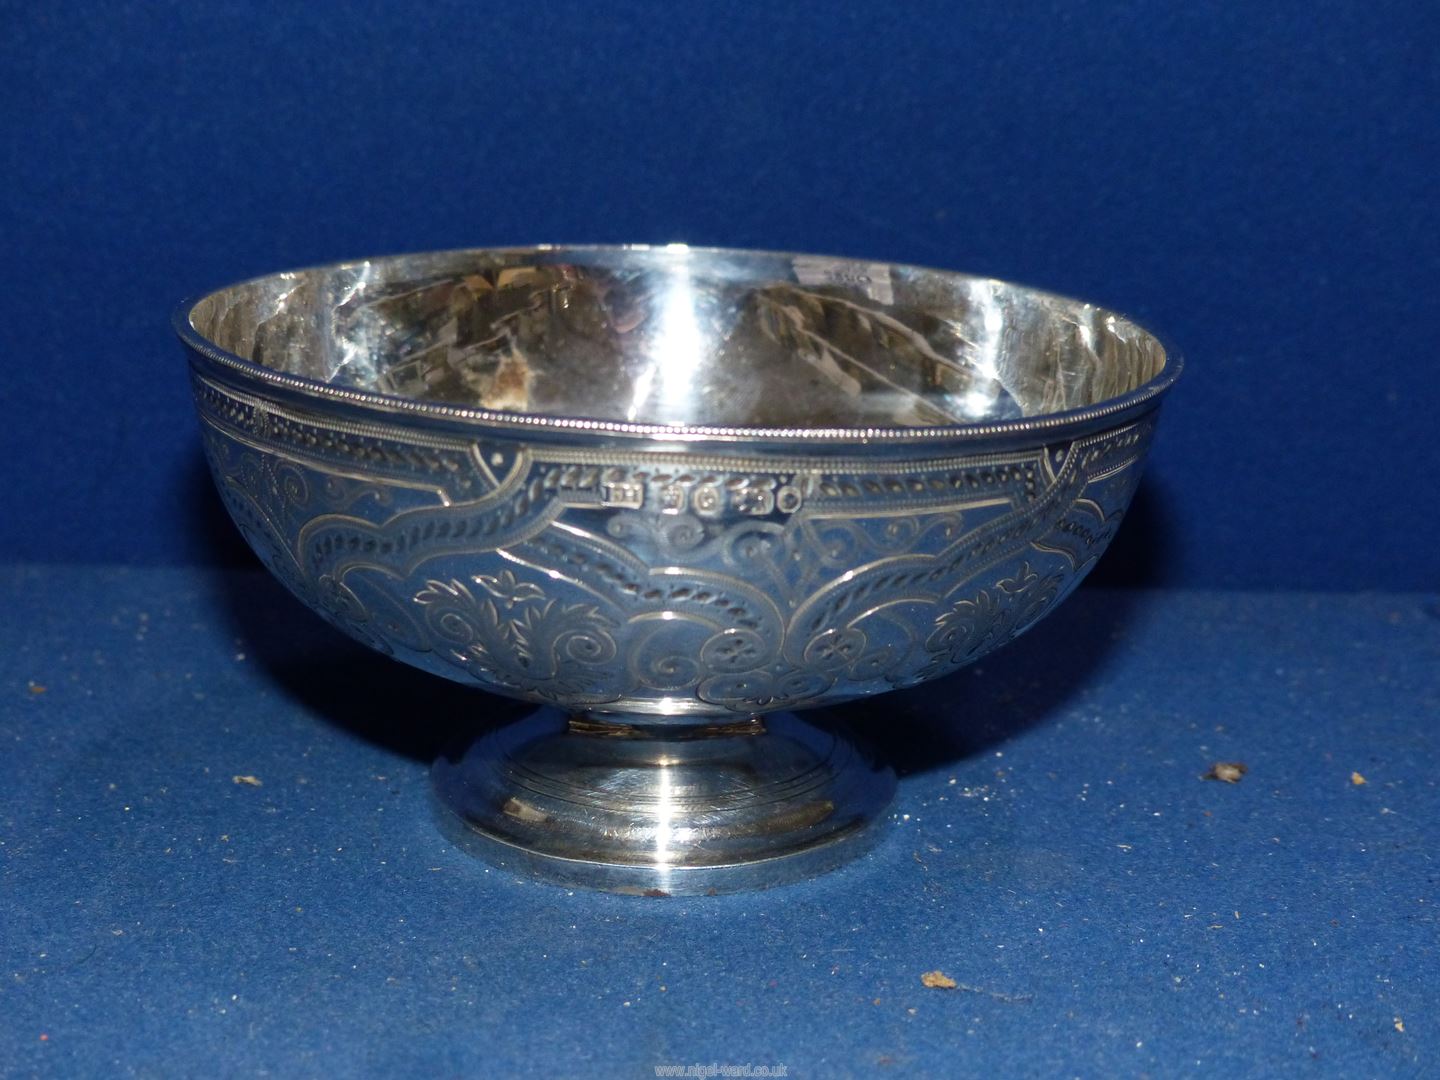 A Victorian silver footed Bowl with engraved detail, Sheffield 1870, by I.H. - Image 3 of 3